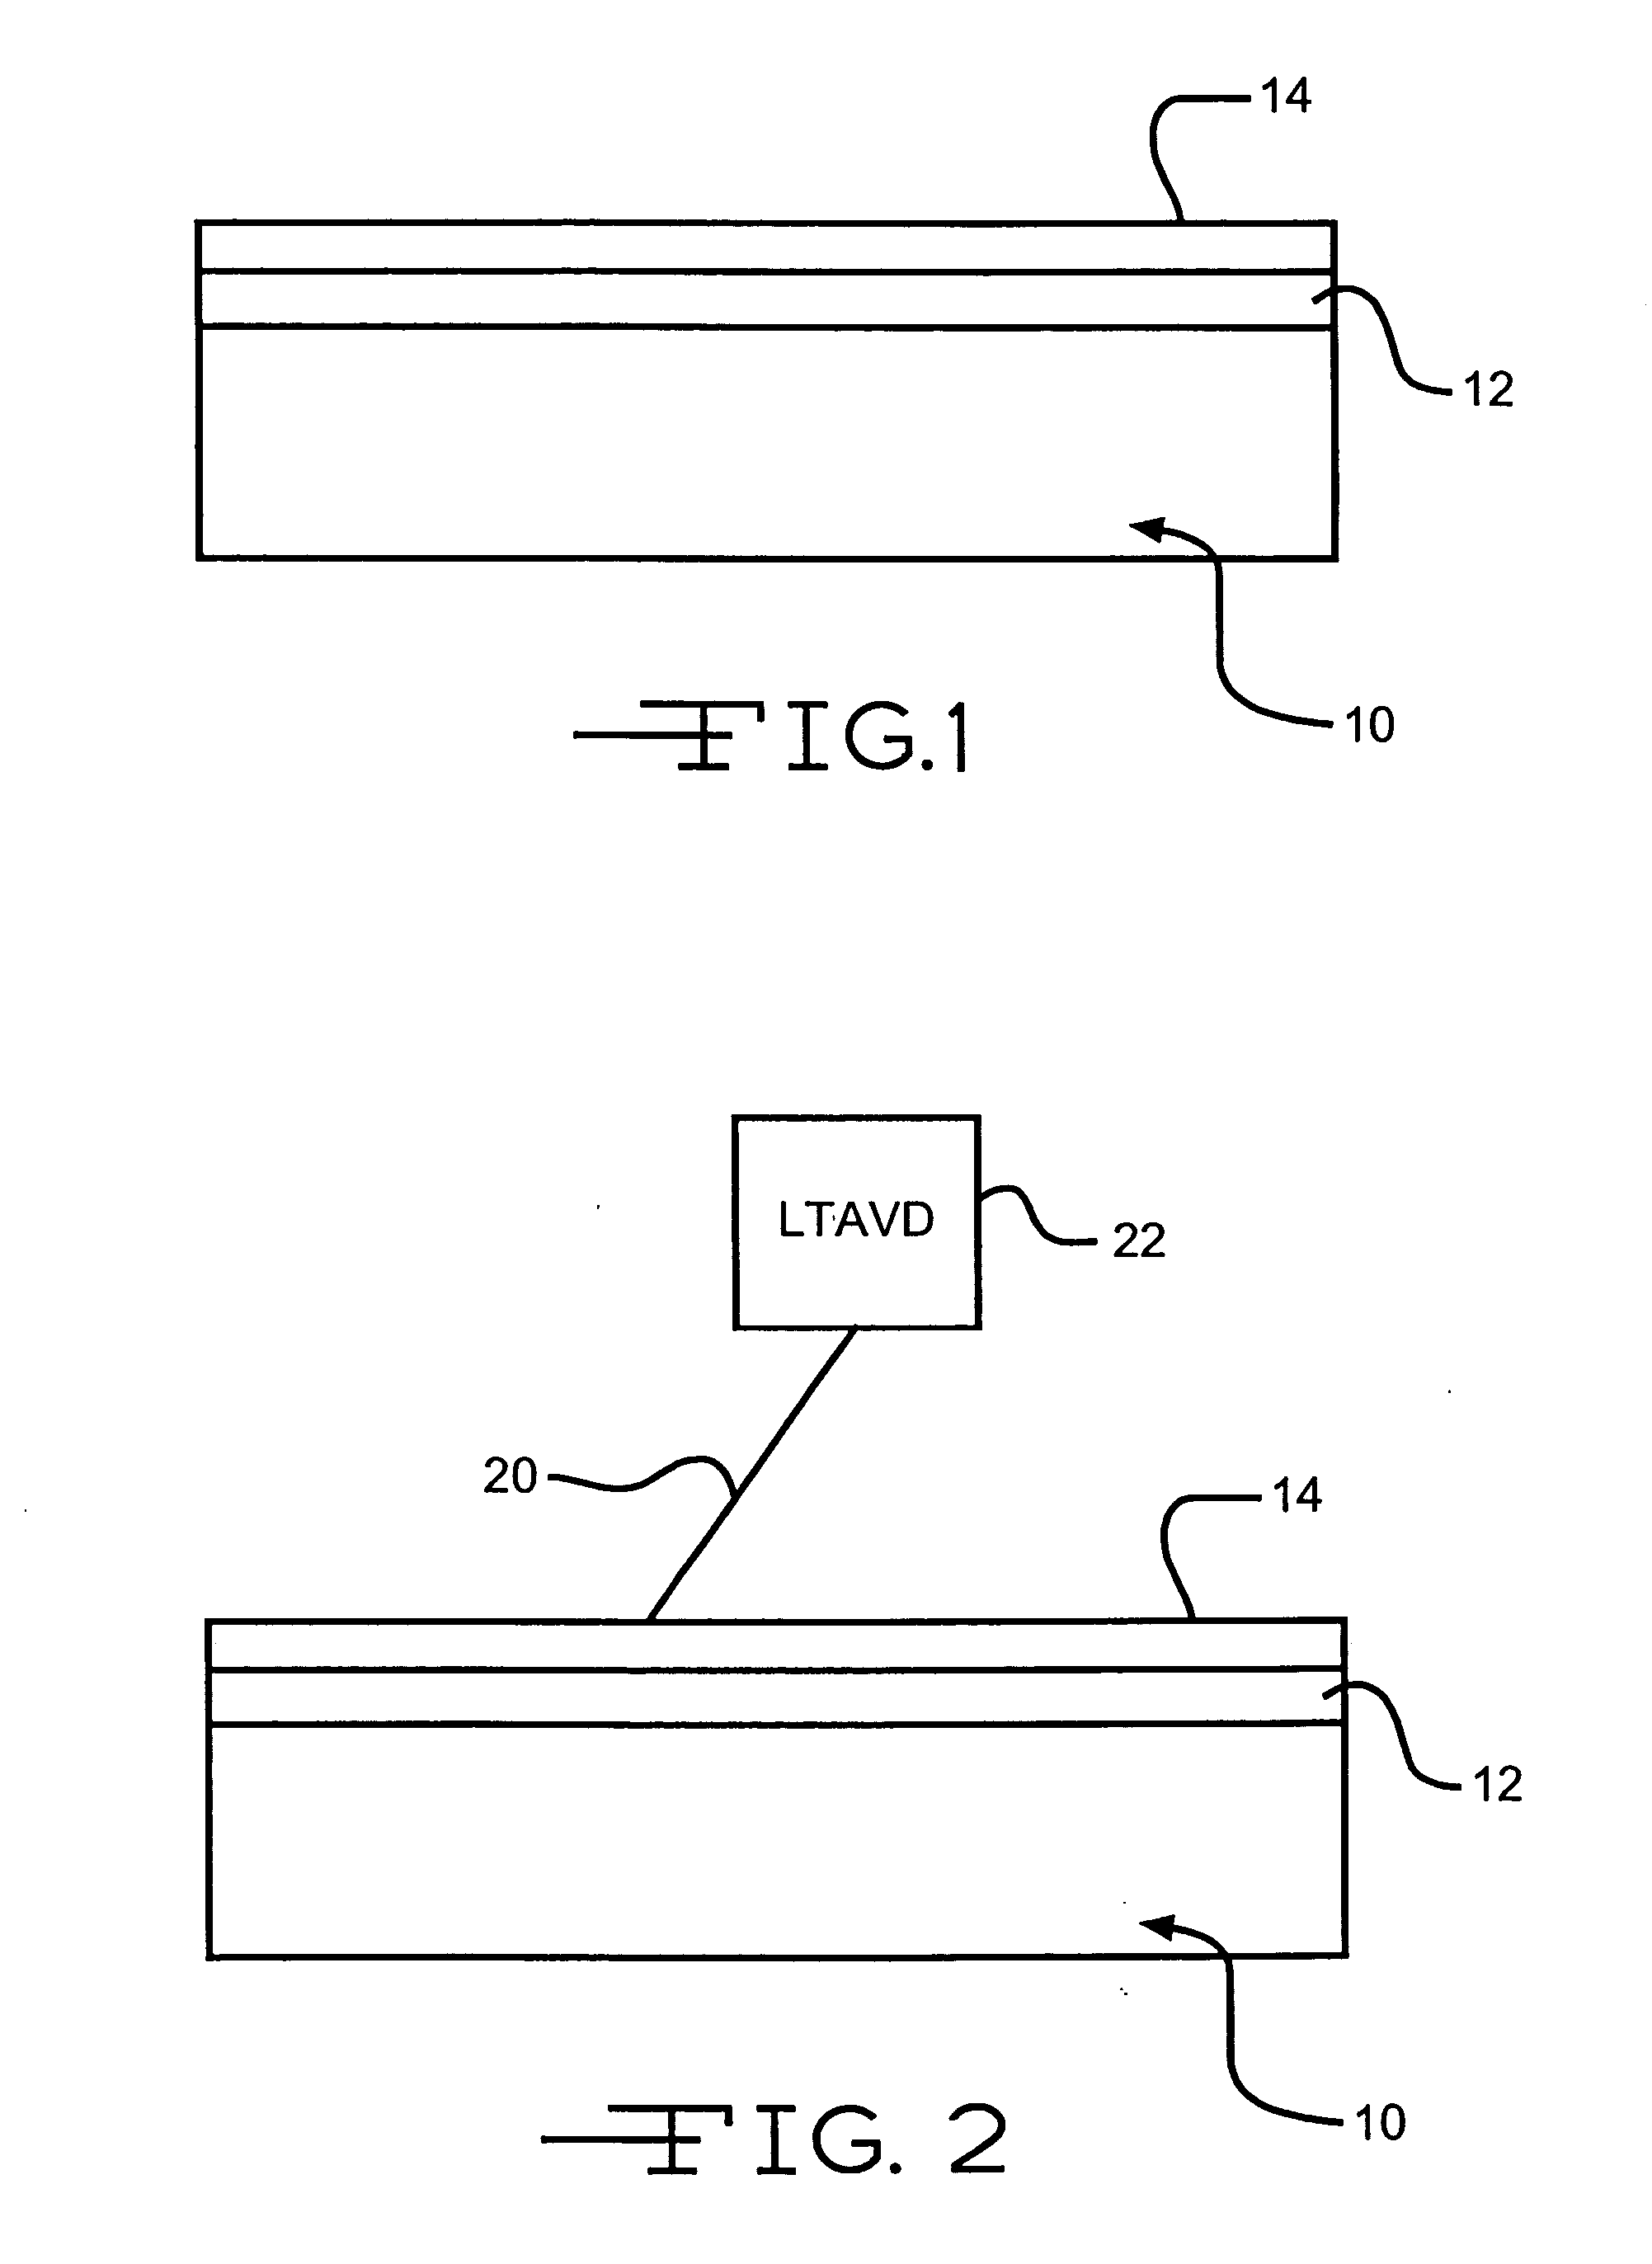 Method for improving electrical conductivity of metals, metal alloys and metal oxides